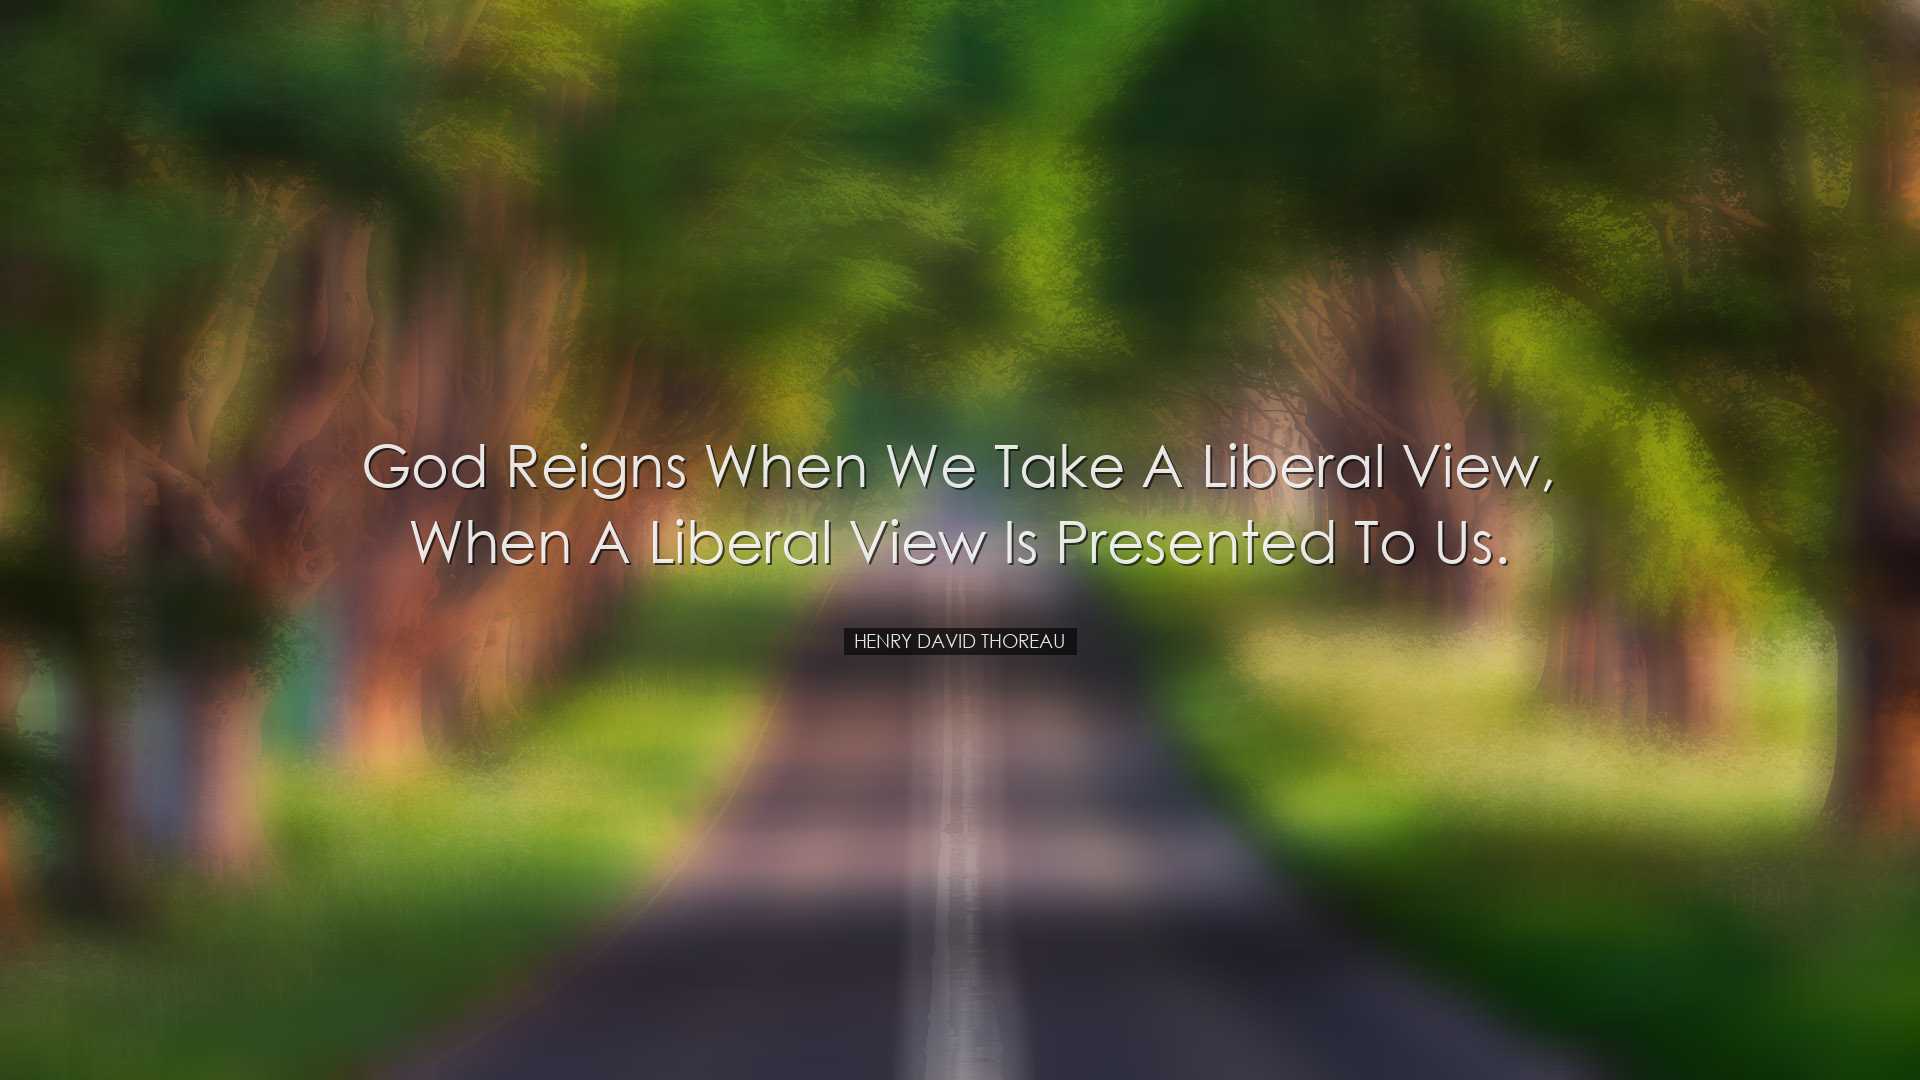 God reigns when we take a liberal view, when a liberal view is pre